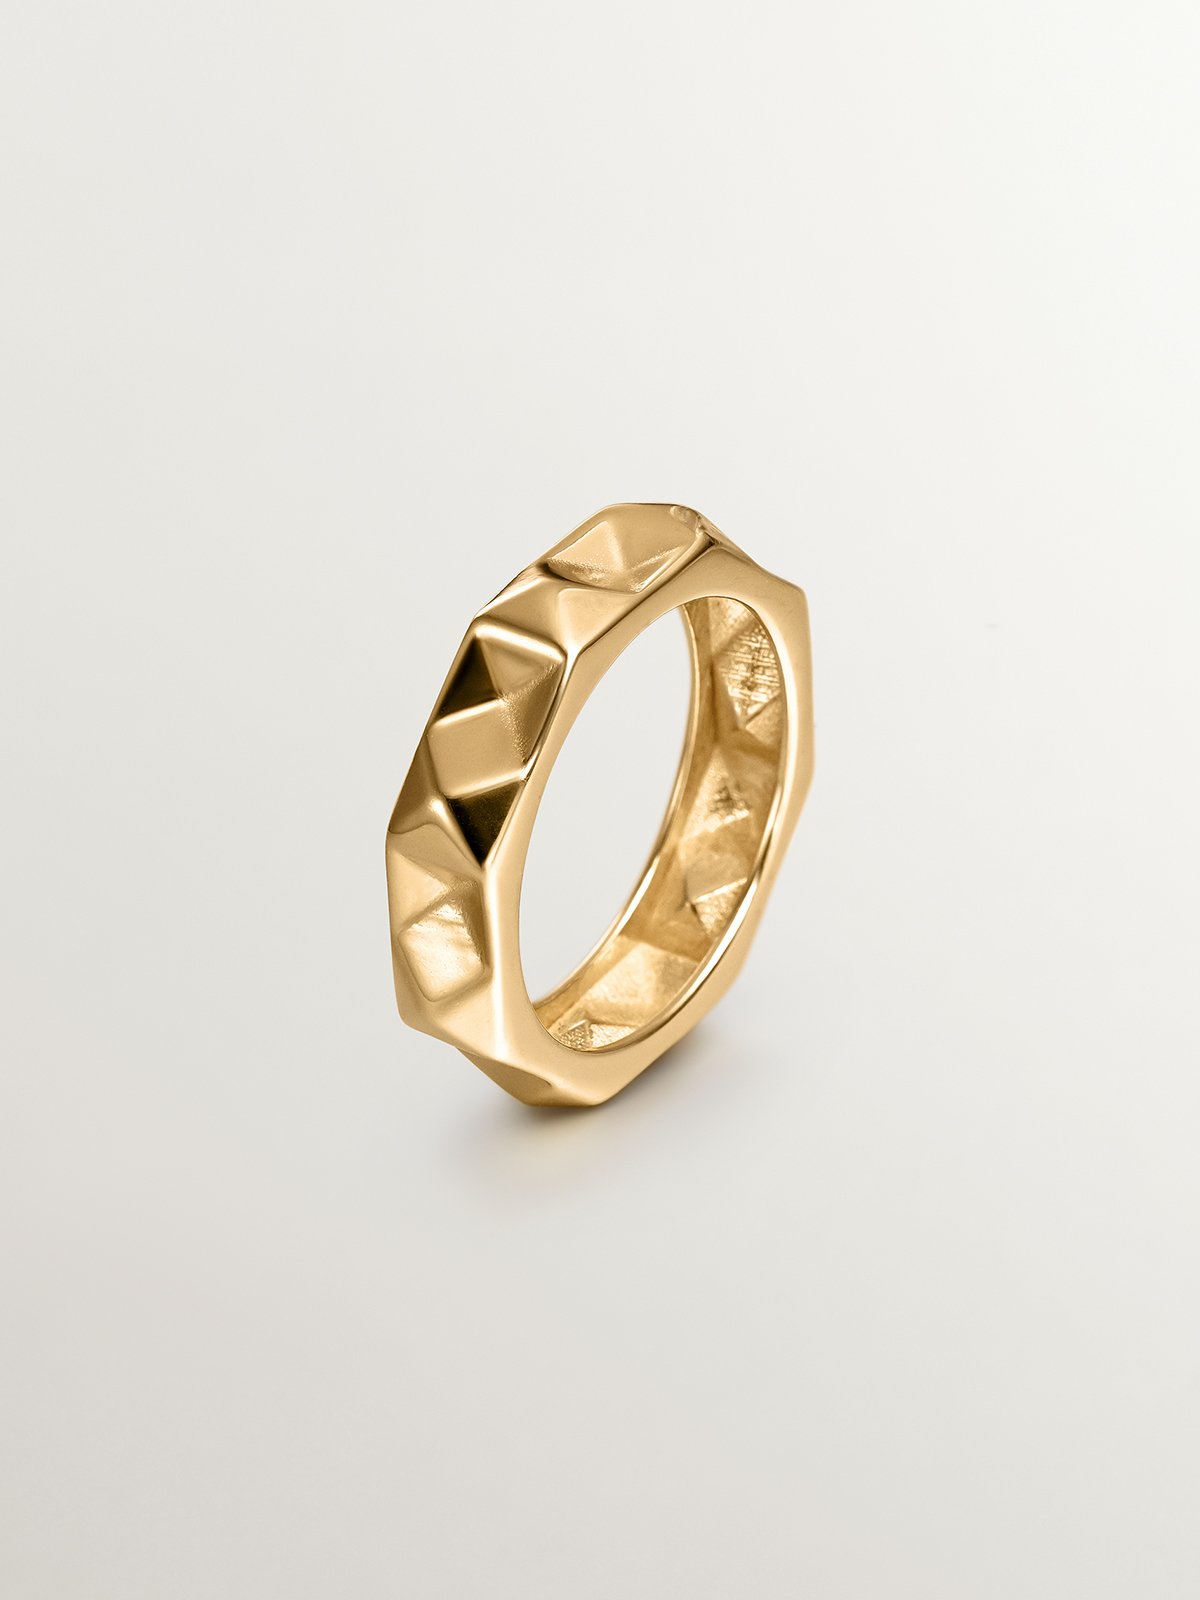 925 silver ring bathed in 18k yellow gold with geometric finish